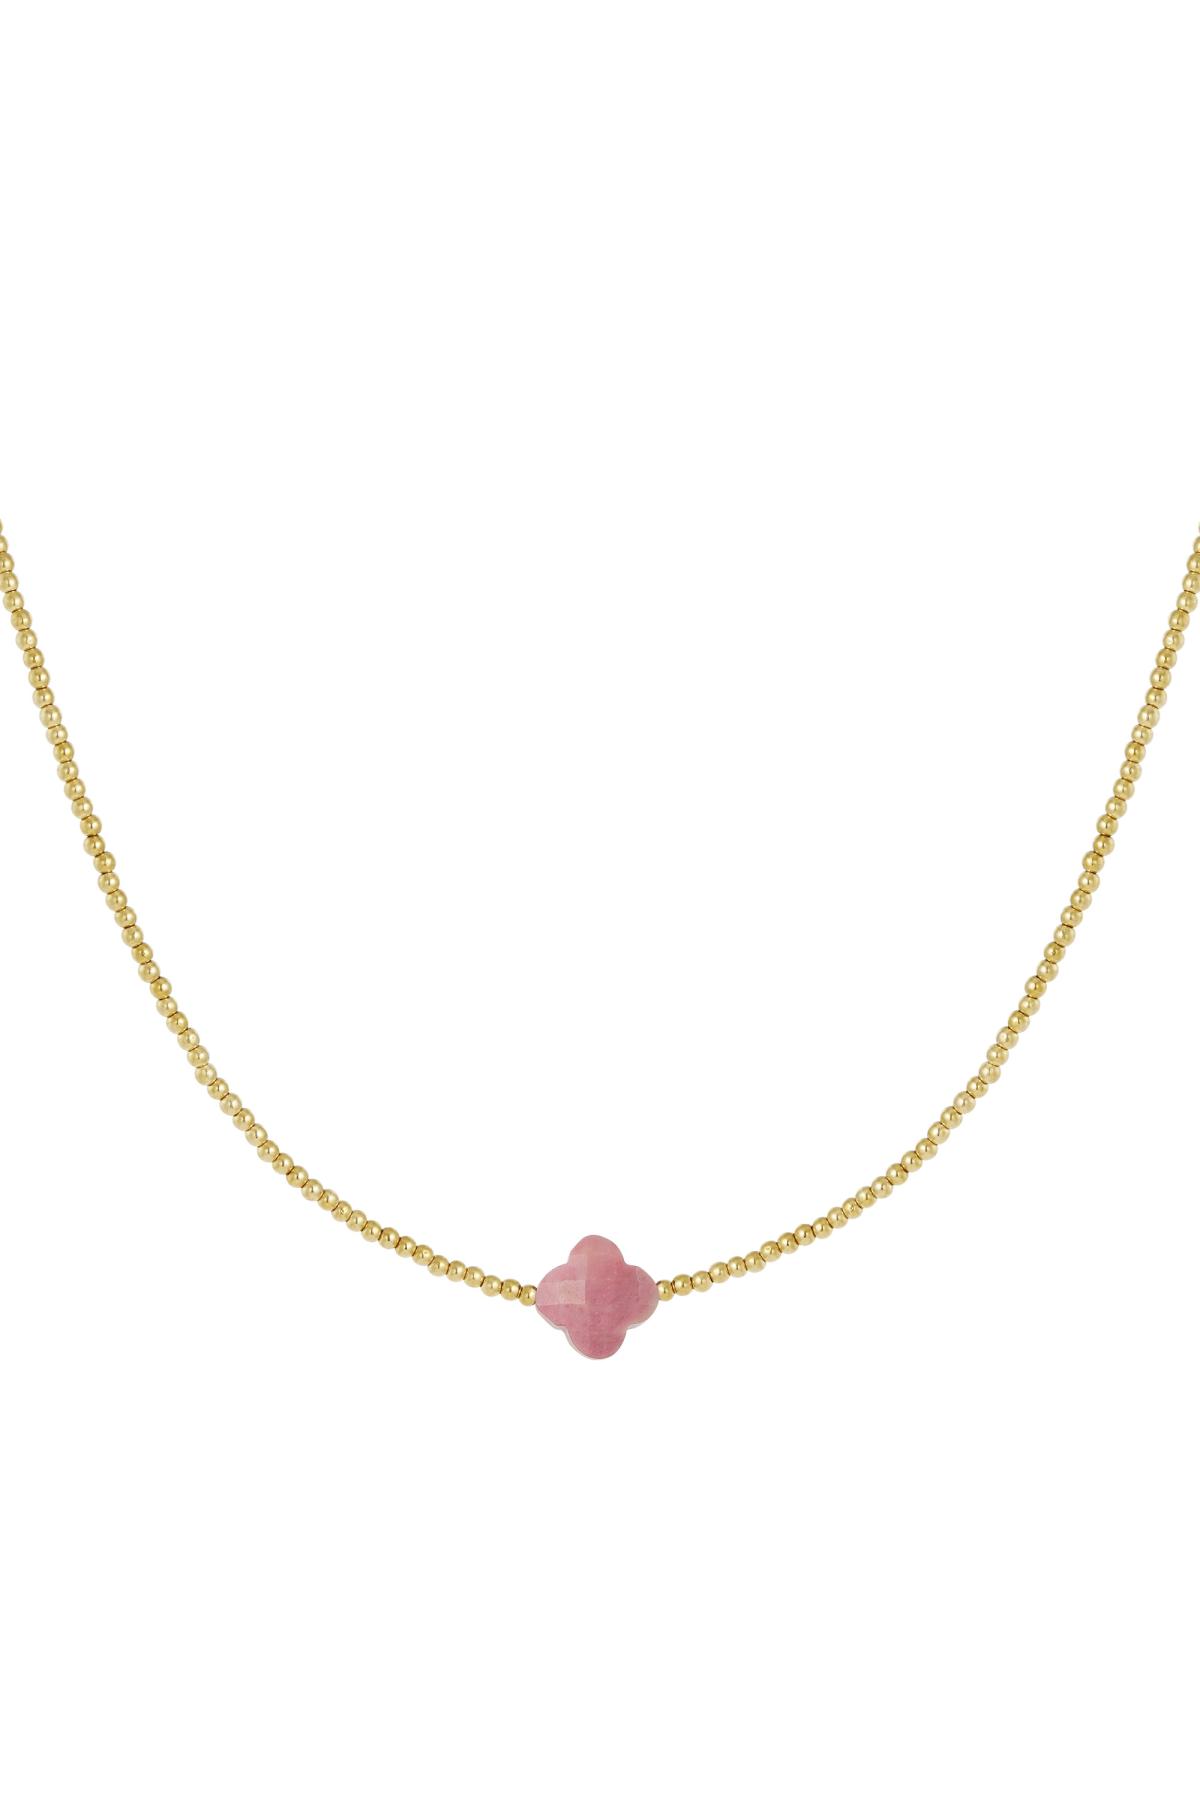 Beaded necklace clover - Natural stones collection Pink & Gold Stainless Steel 